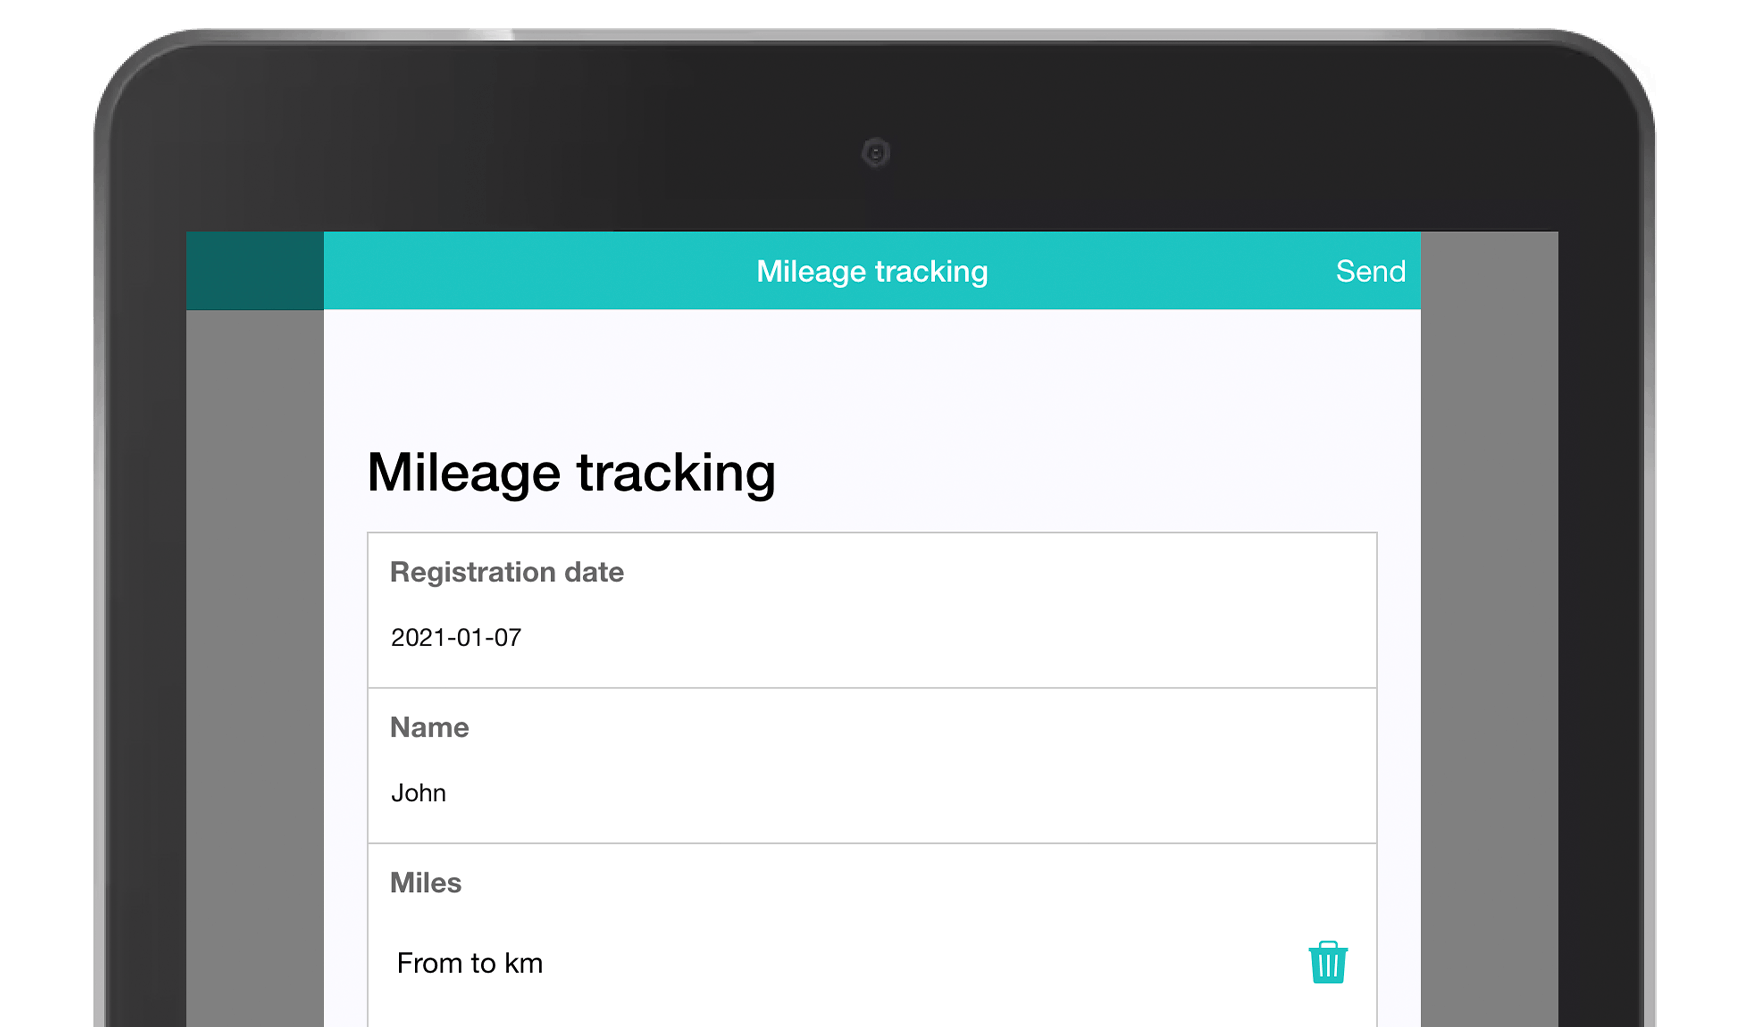 MoreApp Mileage tracking form